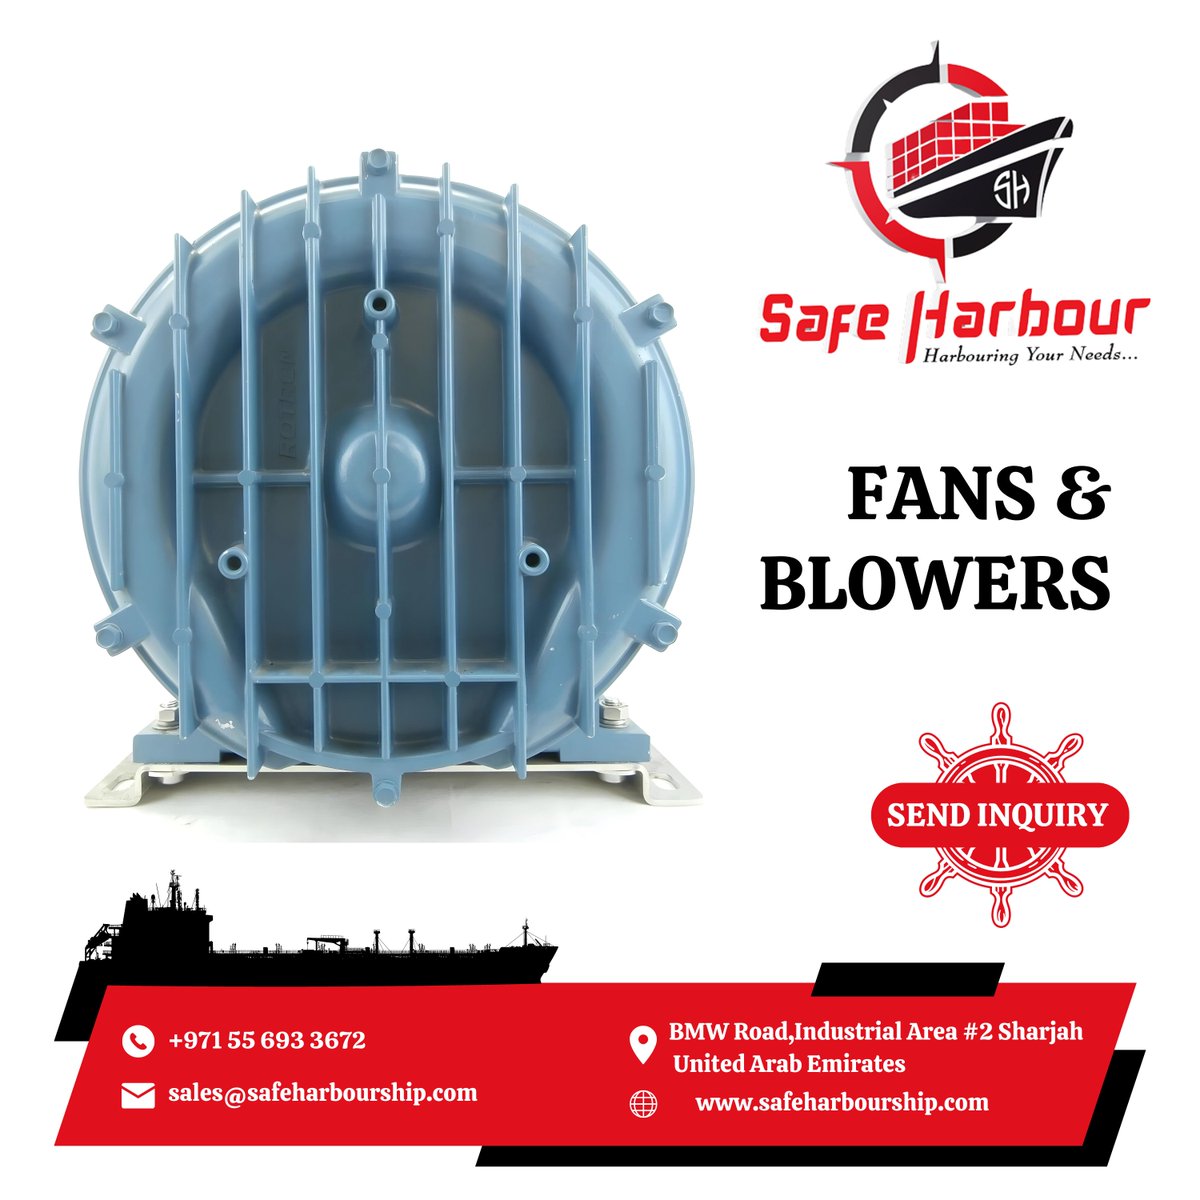 Stay cool and ventilated with Safe Harbour's premium fans and blowers. Trusted marine equipment for superior performance and reliability. Beat the heat and breeze through any challenge.  
Explore more at - safeharbourship.com  
.
.
#safeharbour #marineequipment #fan #harbour